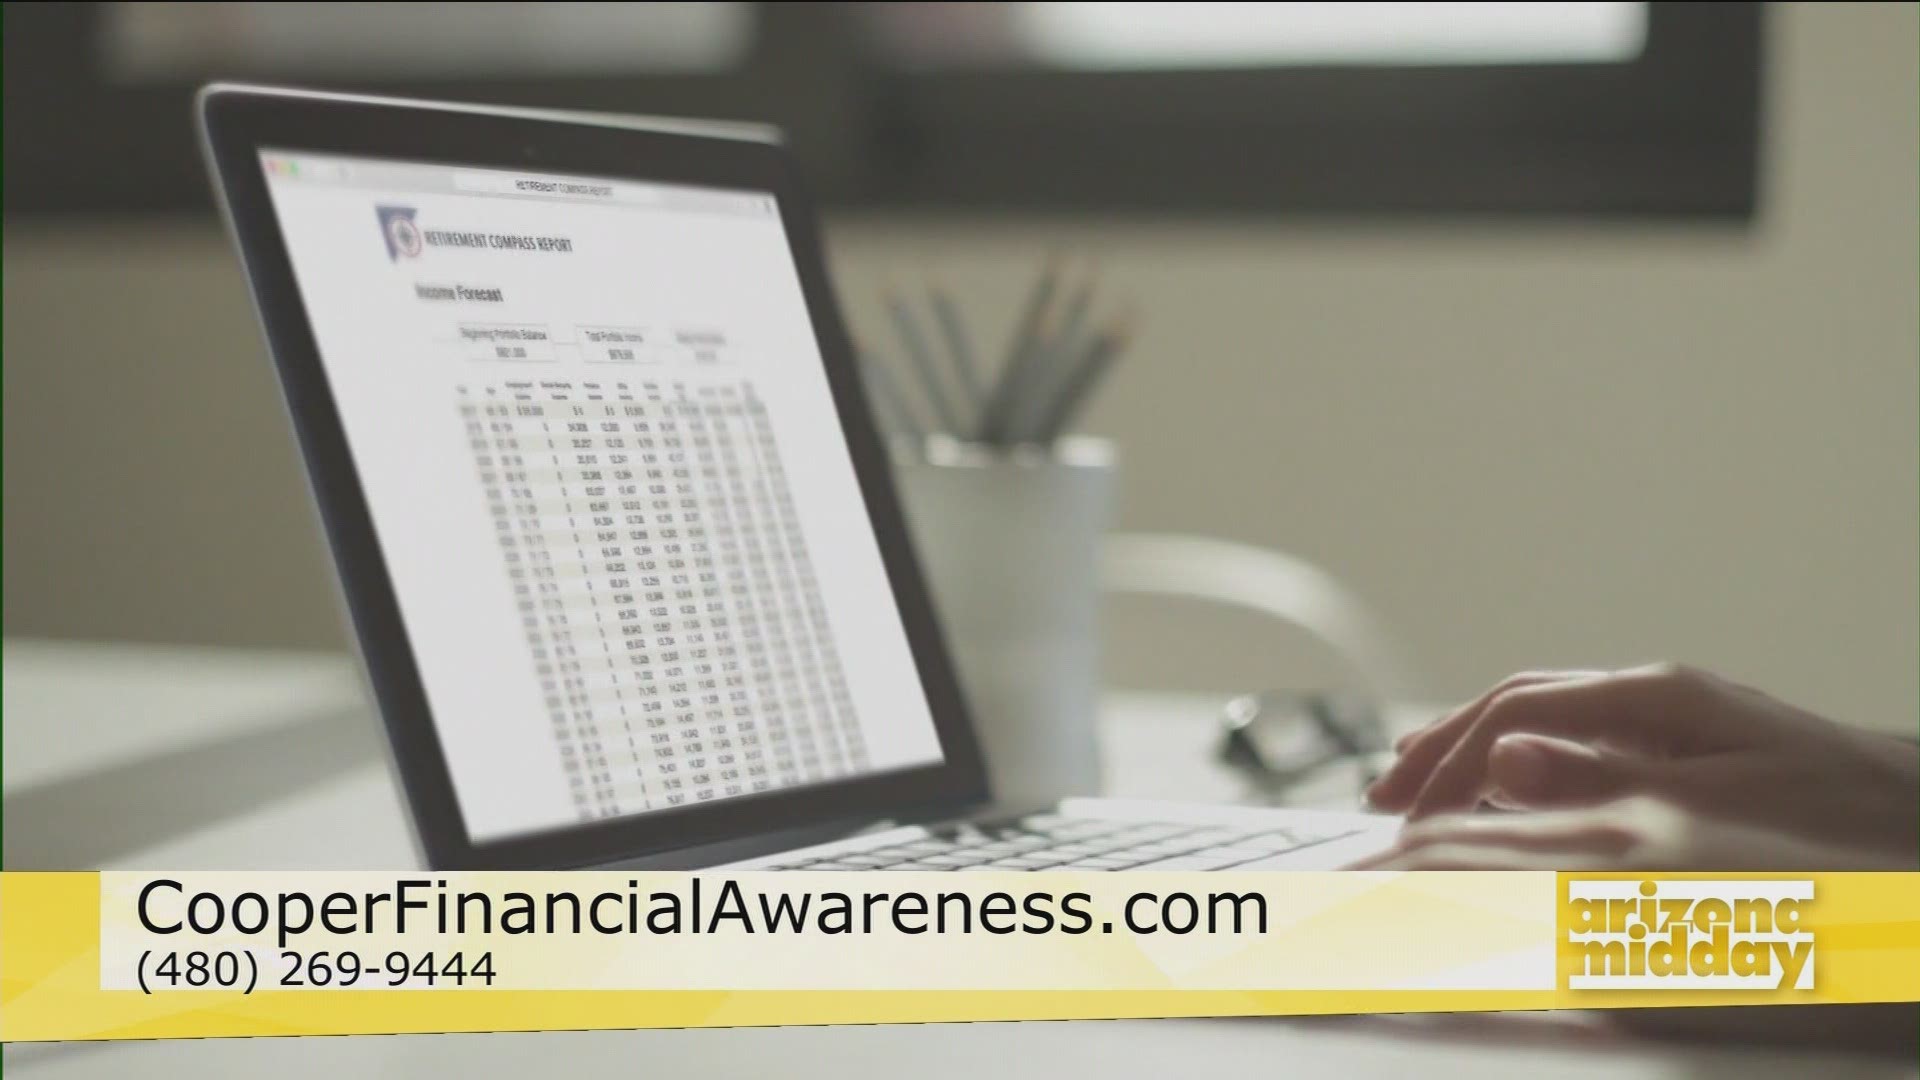 Cooper Financial's Brad Cooper gives us a look at the financial forecast and advice for the new year.